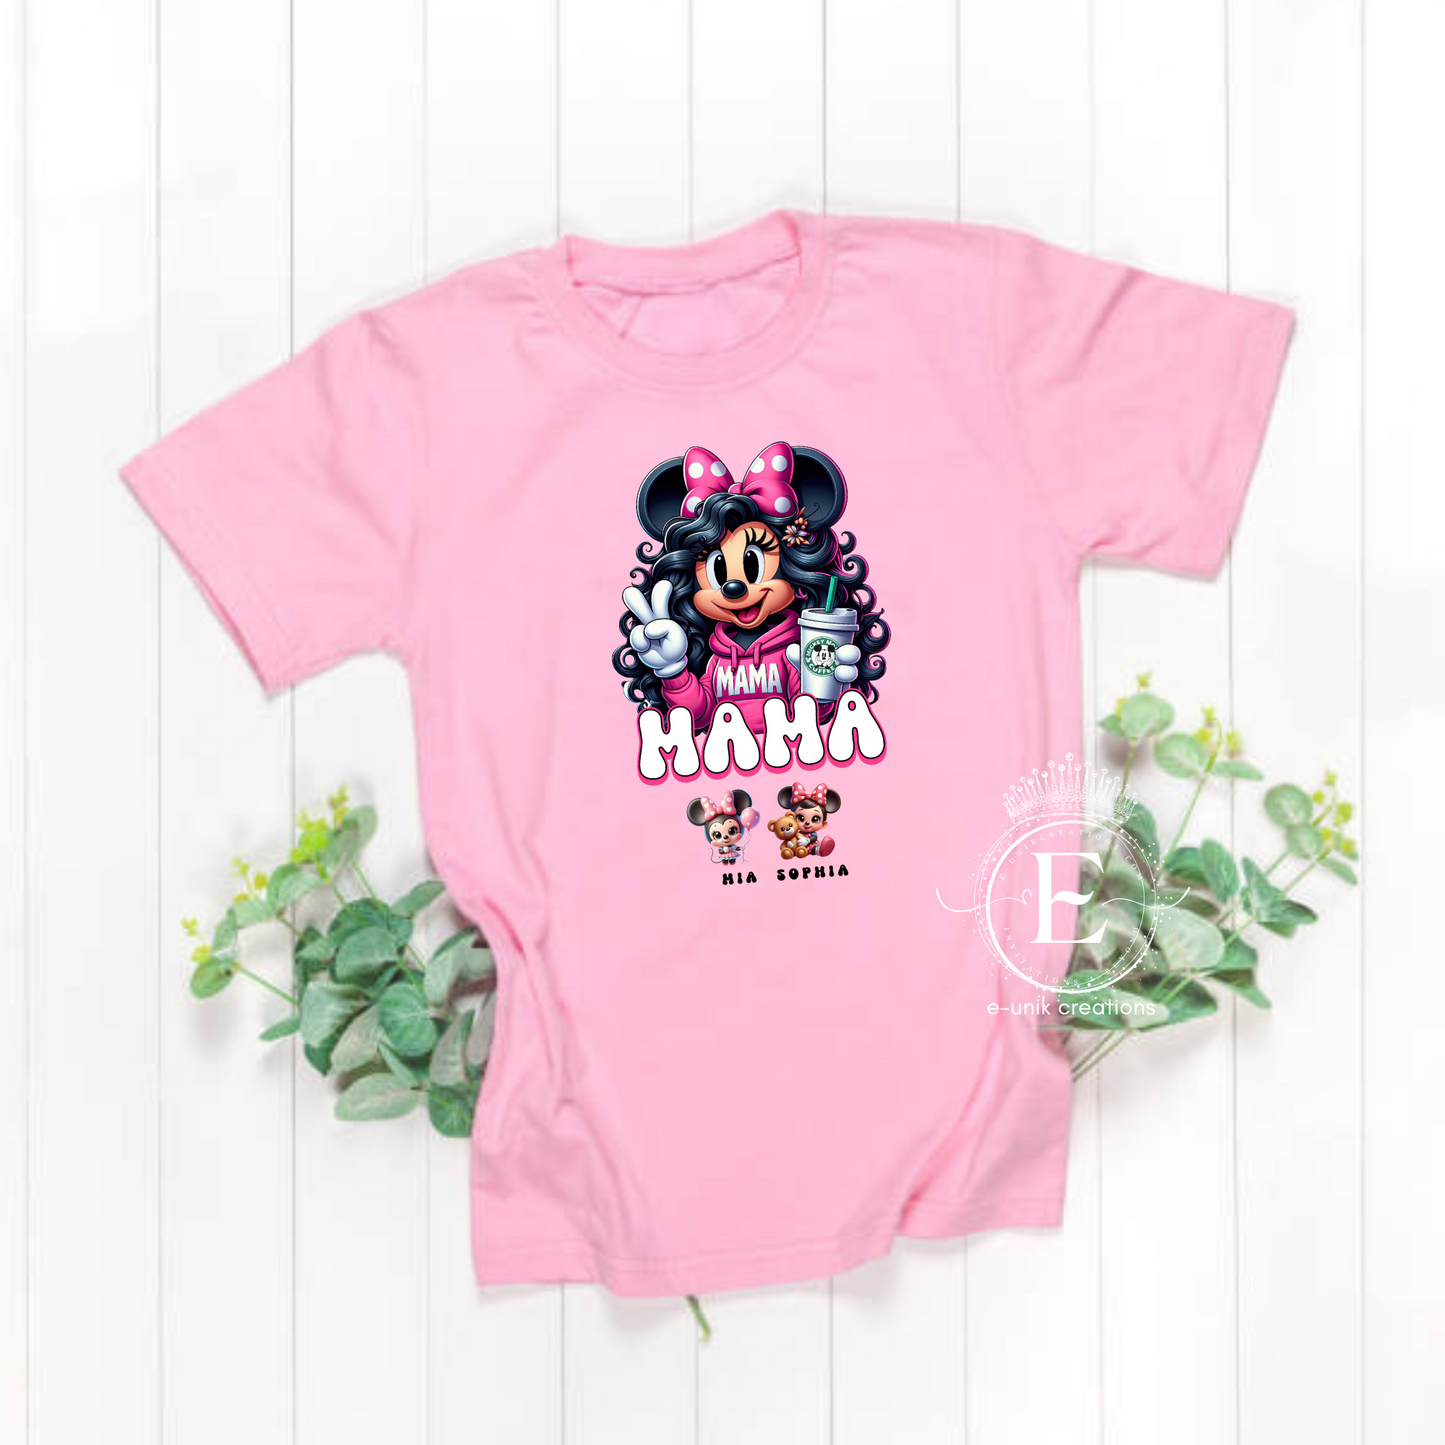 Mouse Mom and Kids T-shirt